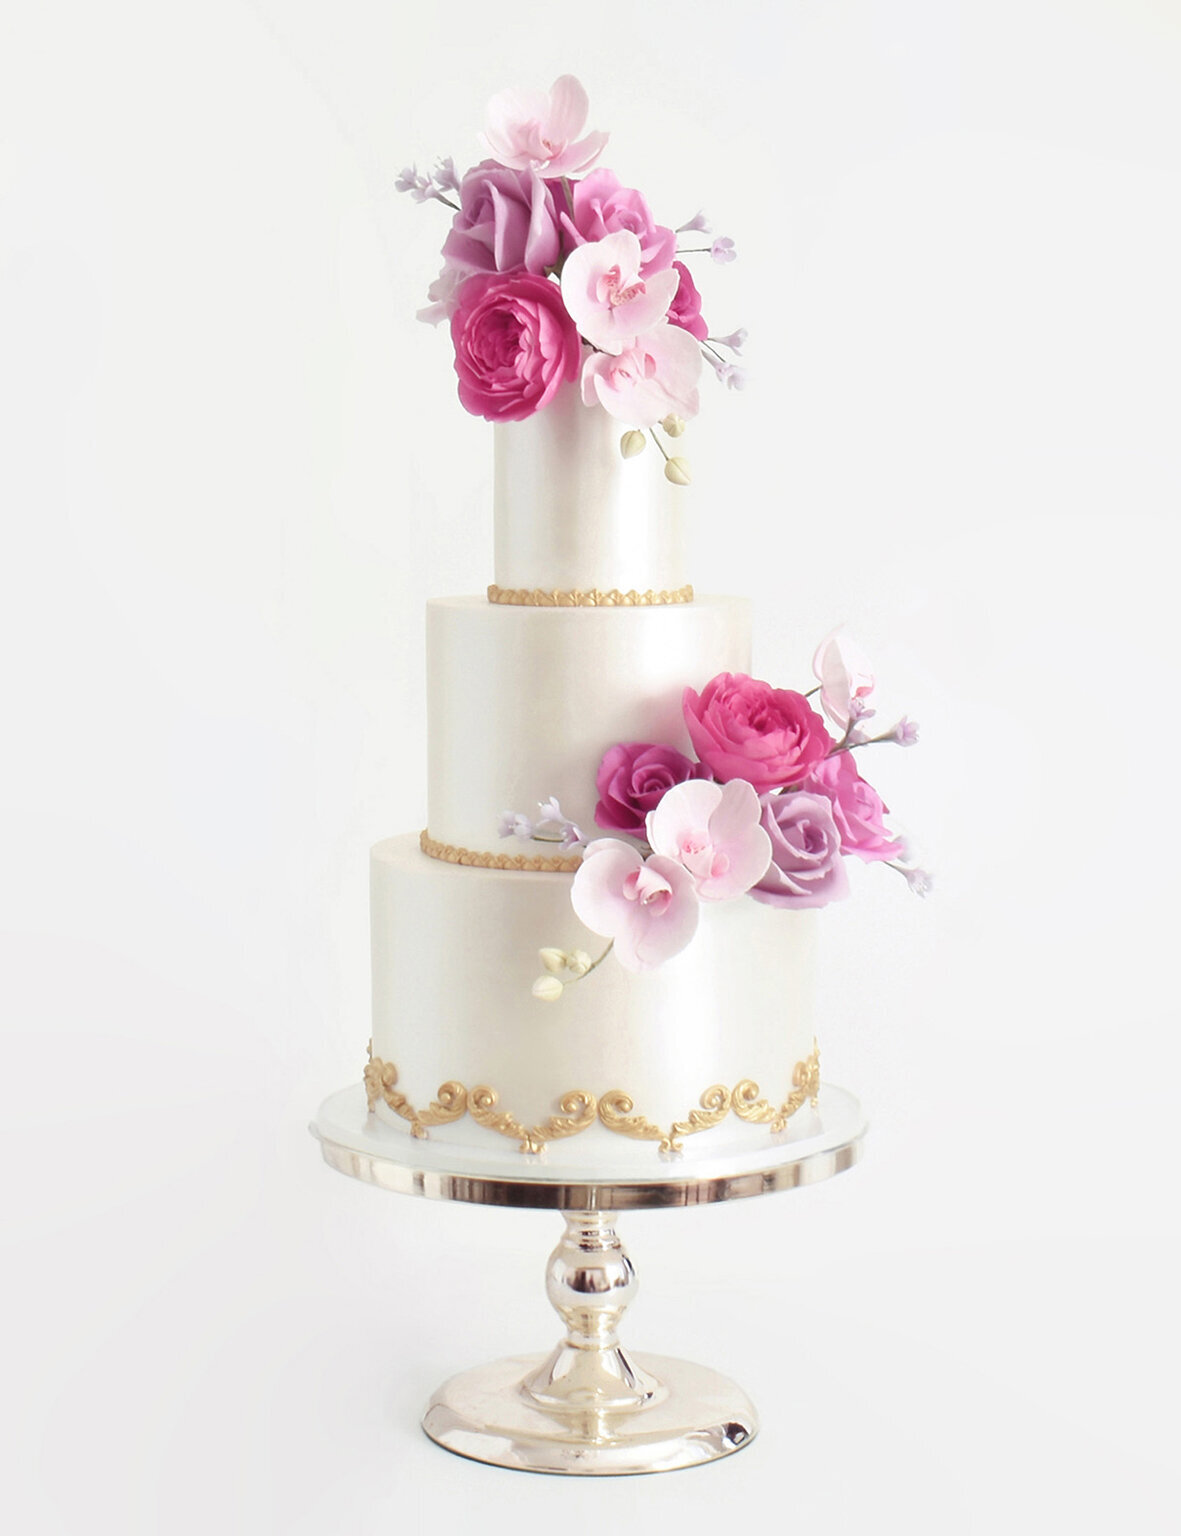 A Glamorous three tiered wedding cake with gold baroque detail and vibrant pink and purple sugar roses and orchids